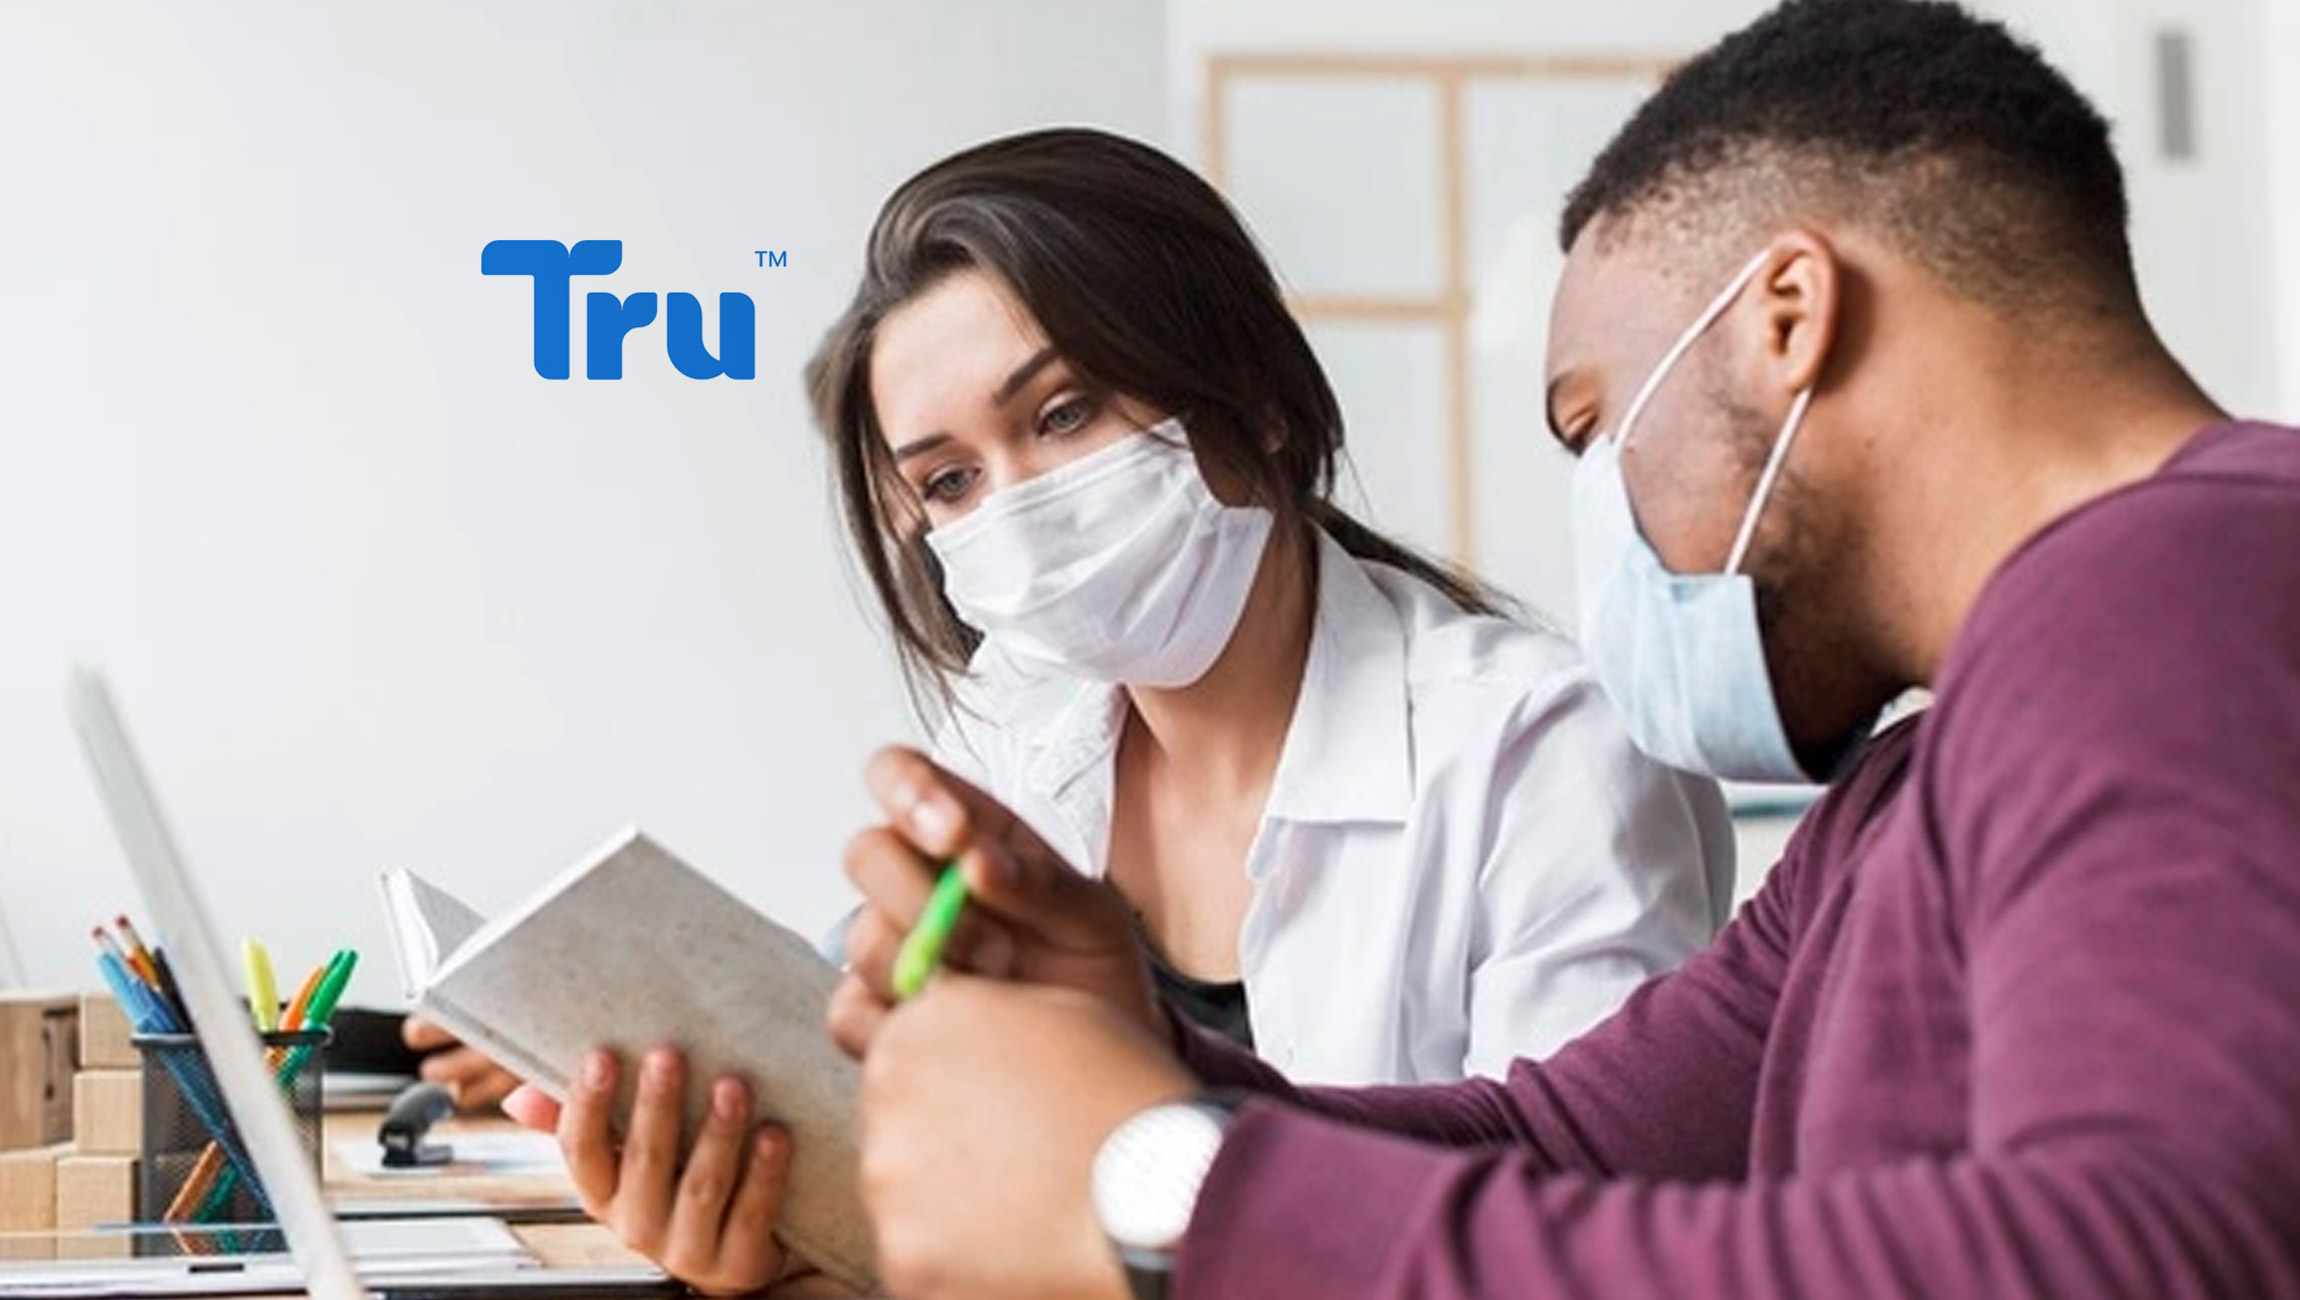 Tru Social Offers A New Solution To The Social Media Crisis